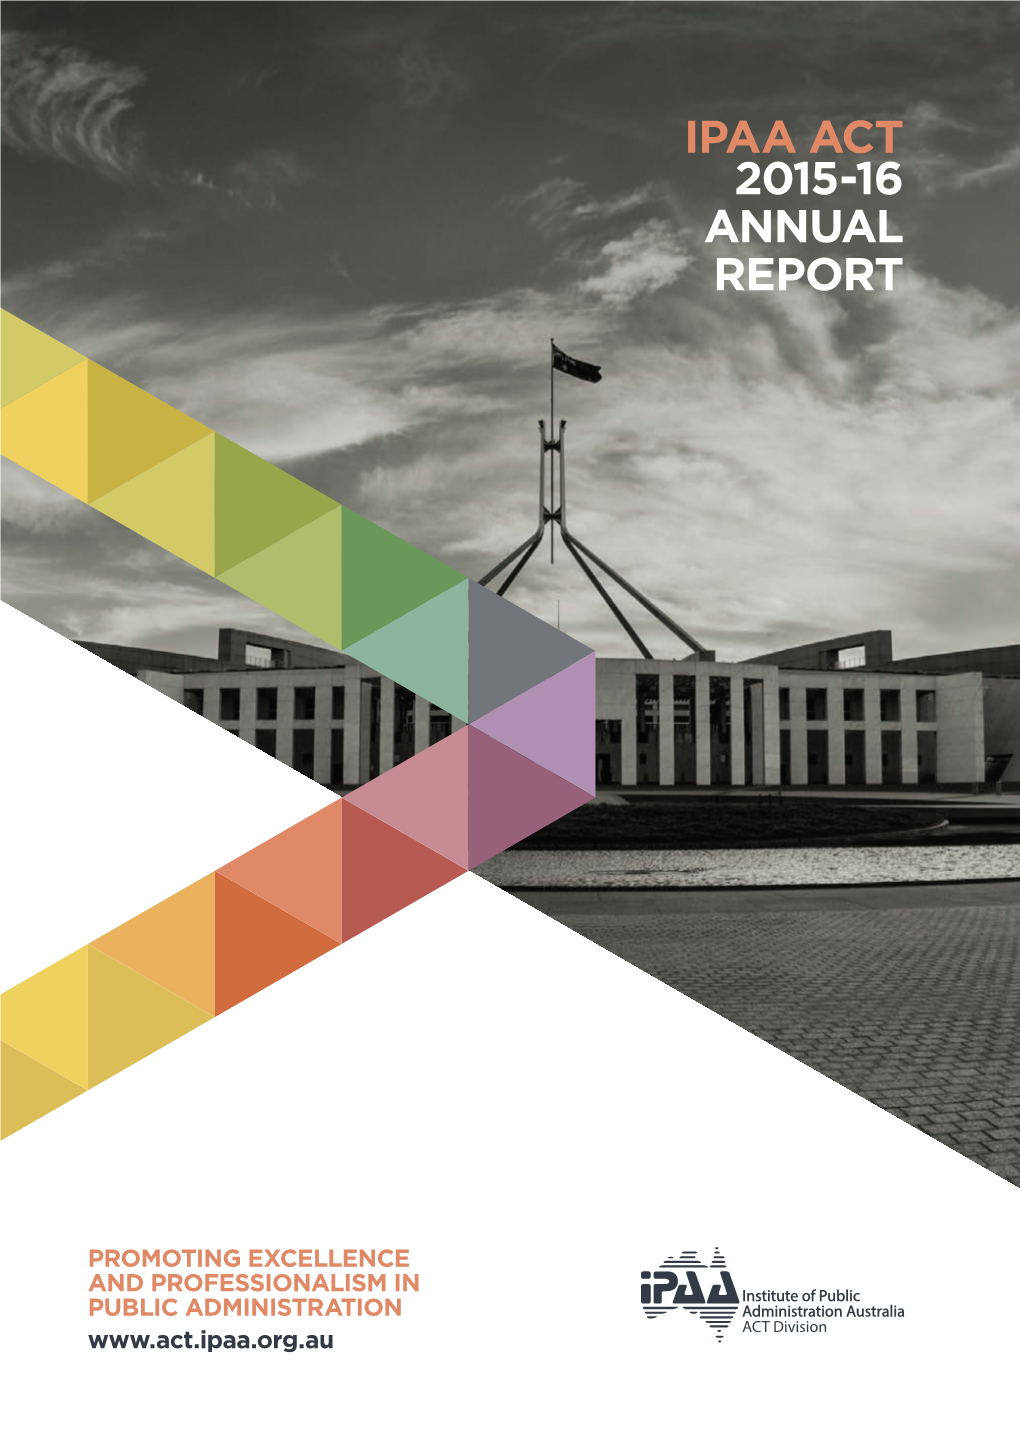 Ipaa Act 2015-16 Annual Report